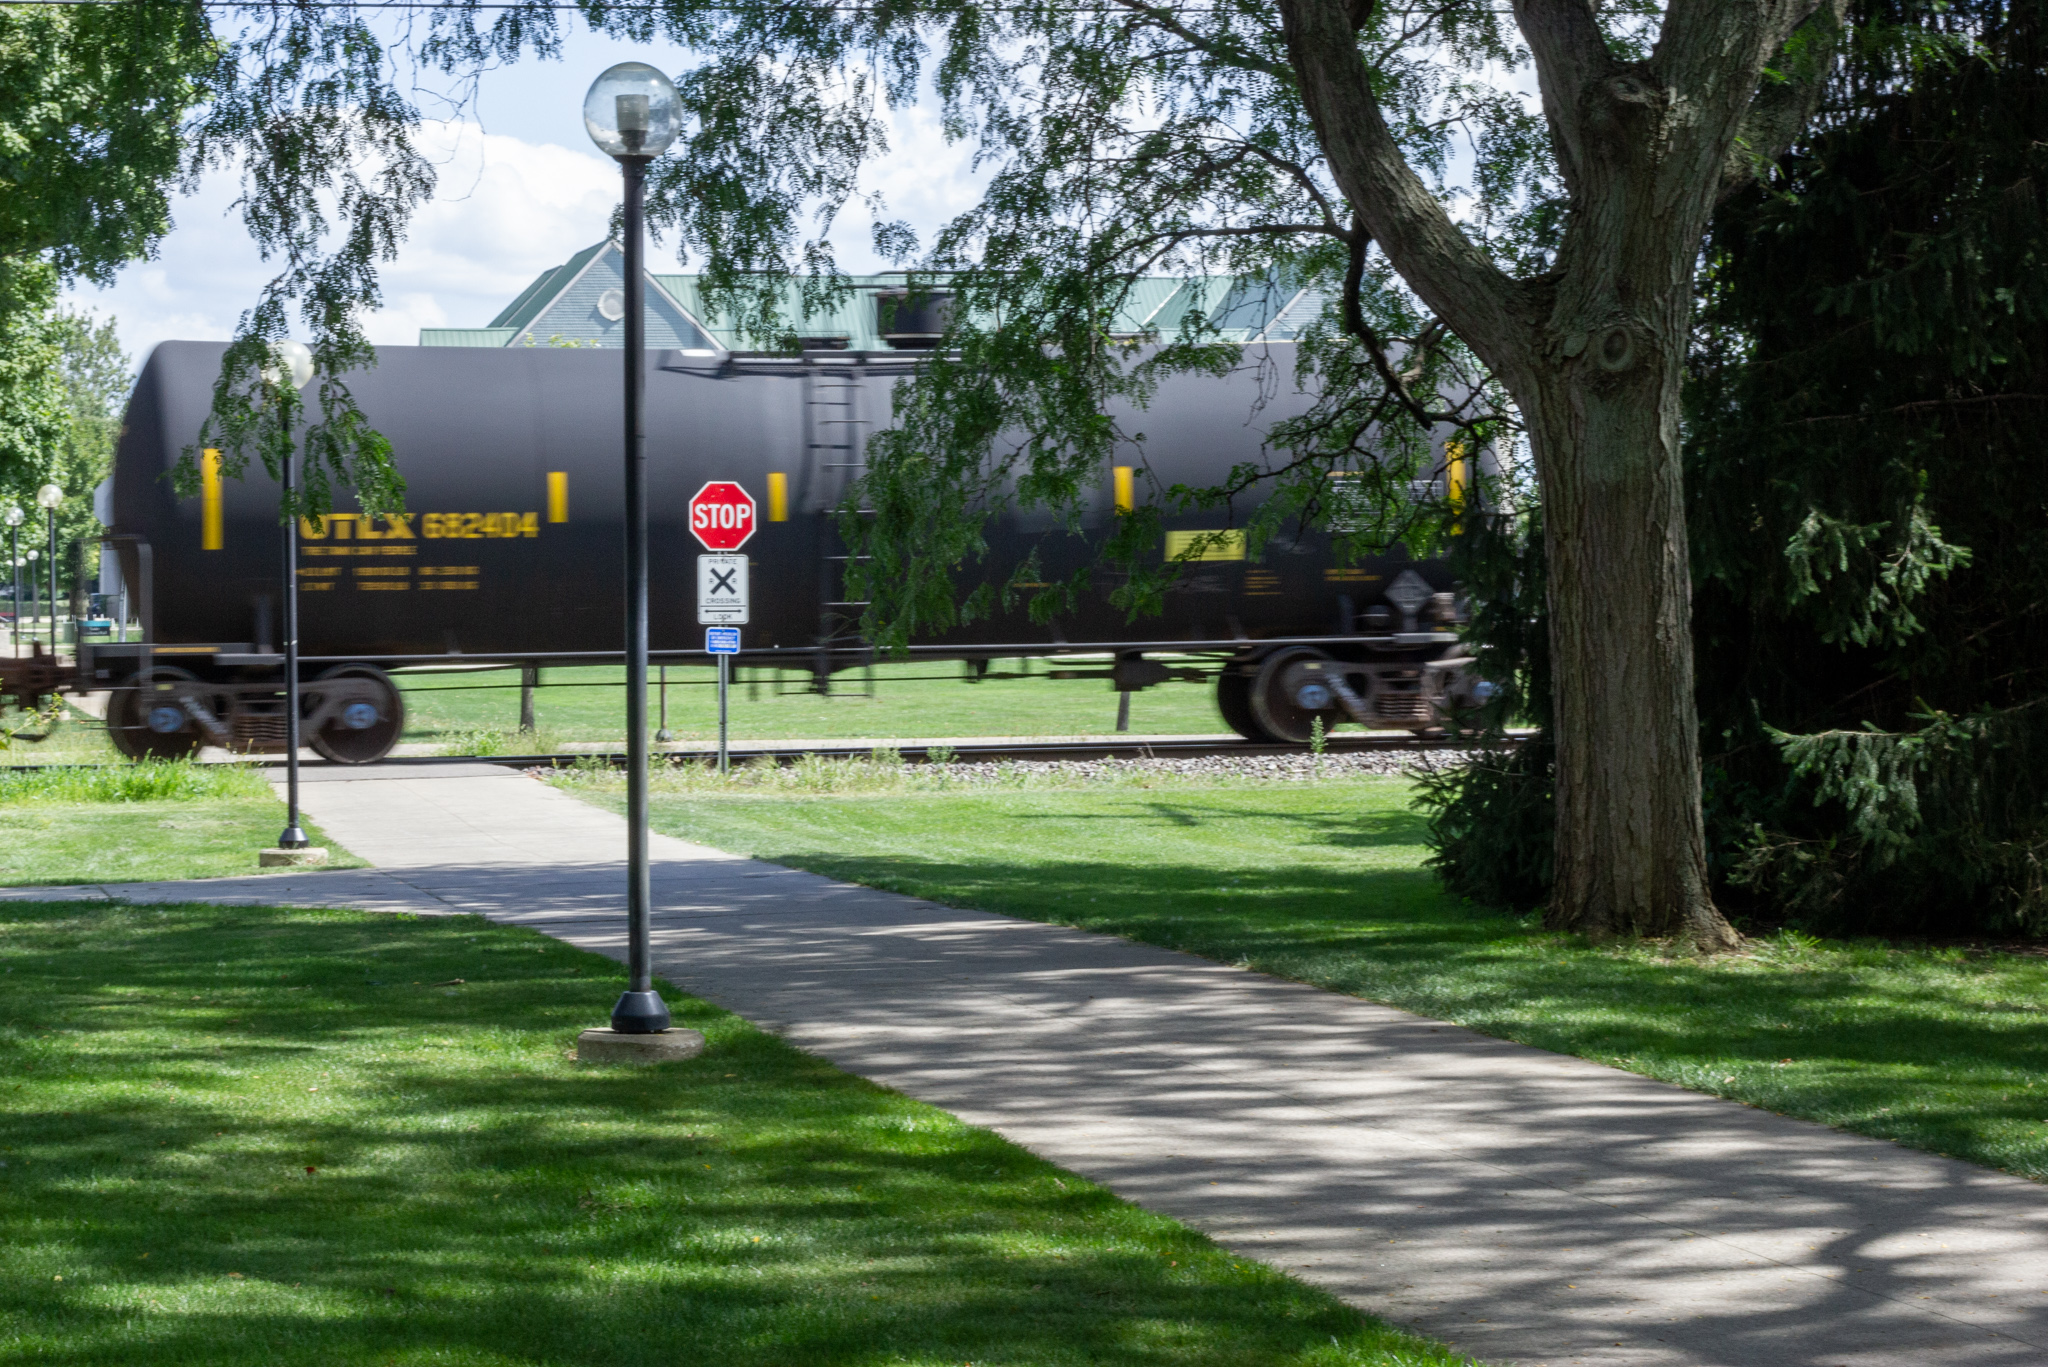 a train thunders through campus. Photo taken from the side shows train cars passing over a sidewalk crossing.